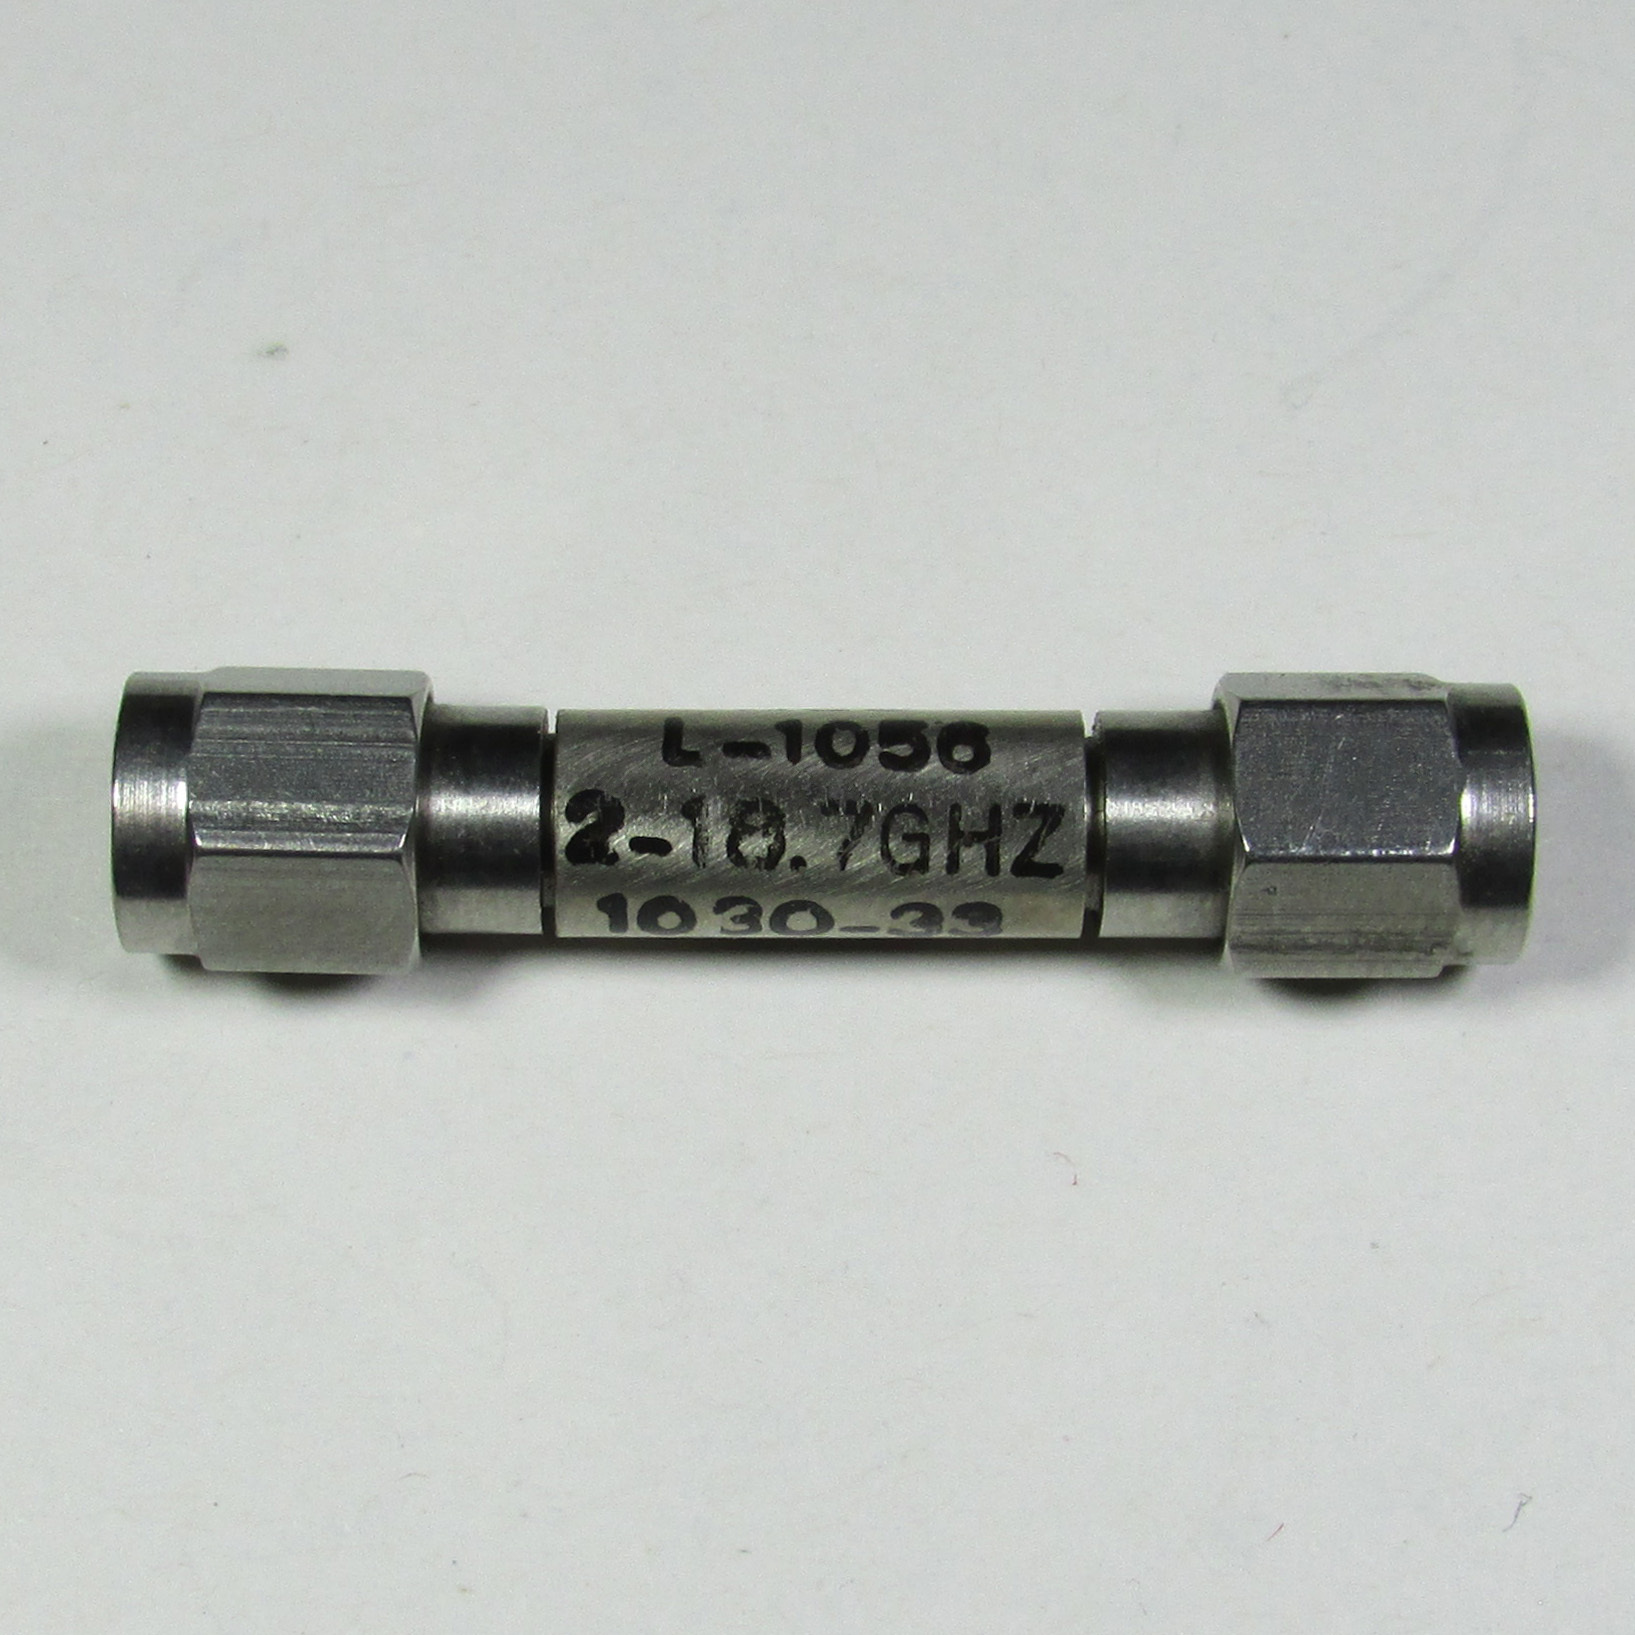 RLC L-1056 2-18.7GHz SMA RF microwave coaxial low-pass filter